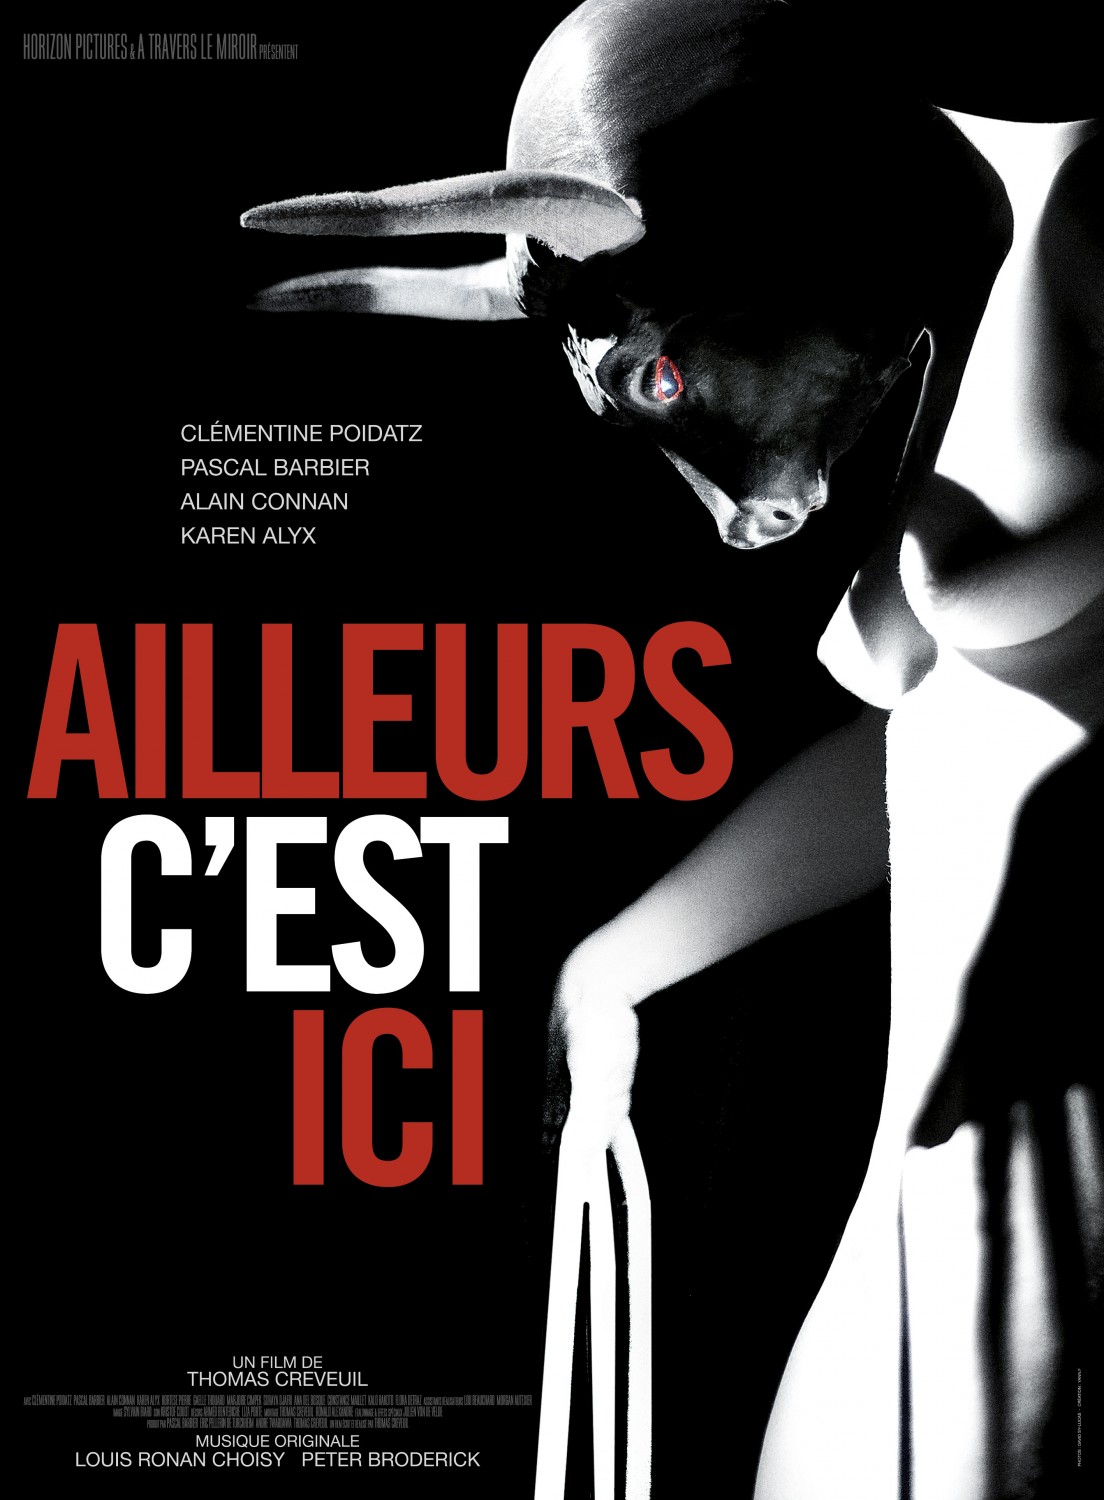 Extra Large Movie Poster Image for Ailleurs c'est ici